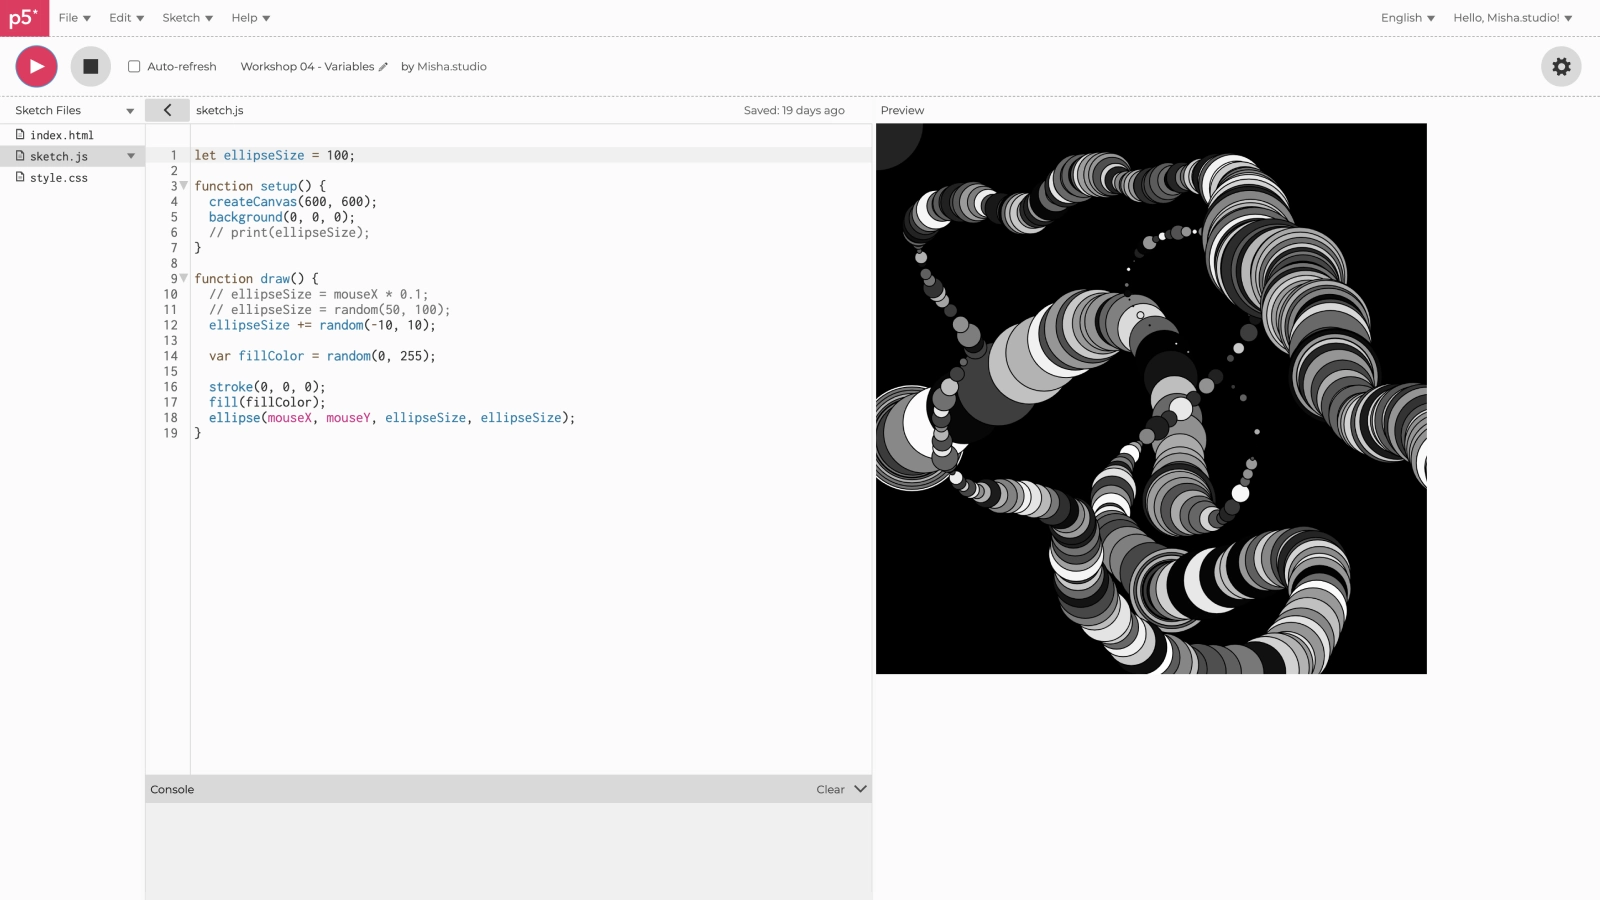 Screenshot of the p5.js editor with a sketch about variables